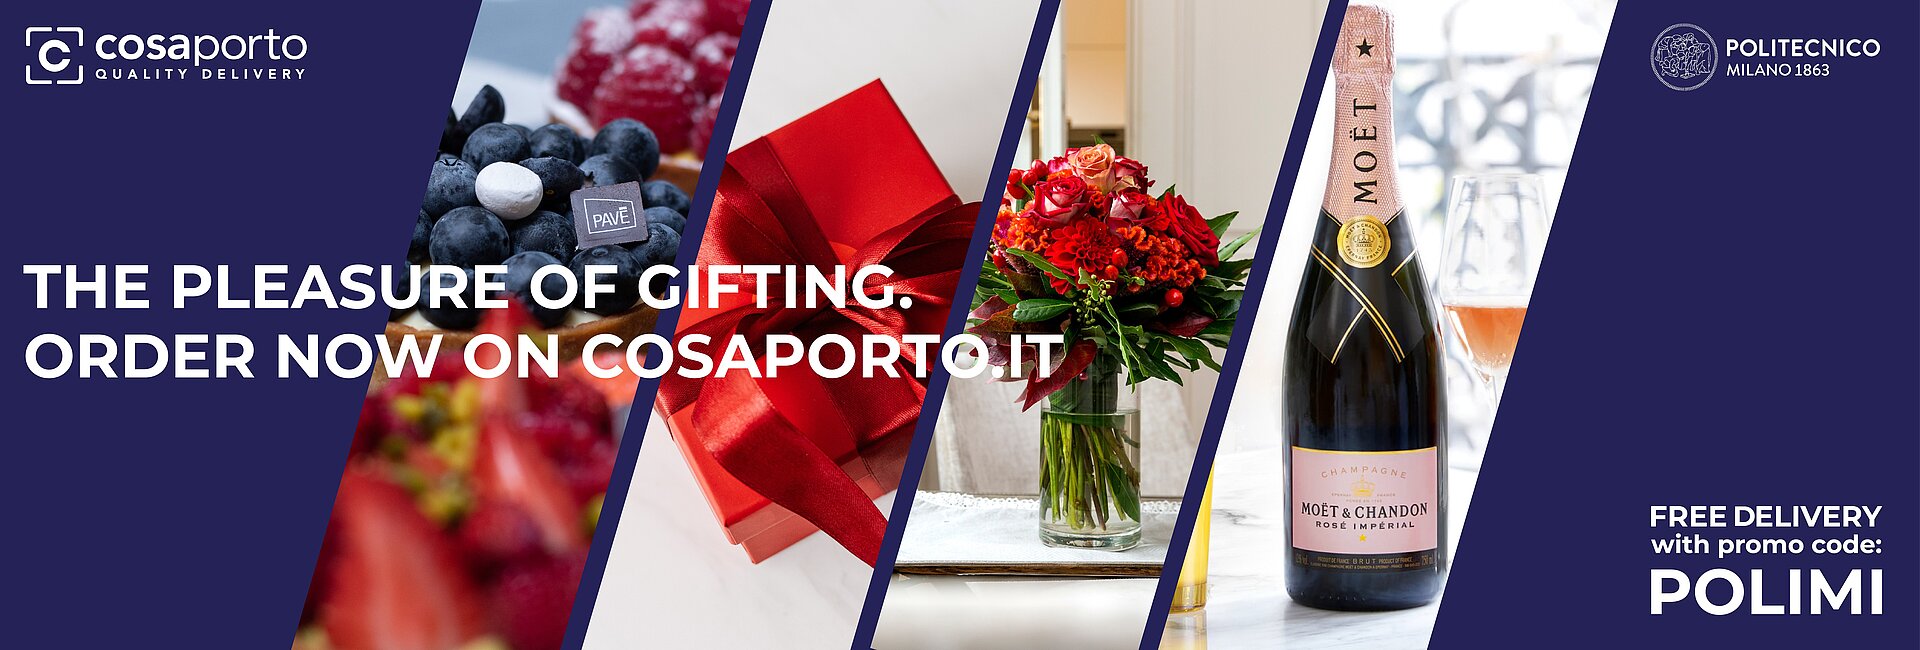 Cosaporto, Quality Delivery: the pleasure of gifting. Order now on cosaporto.it - Free delivery with promo code: POLIMI